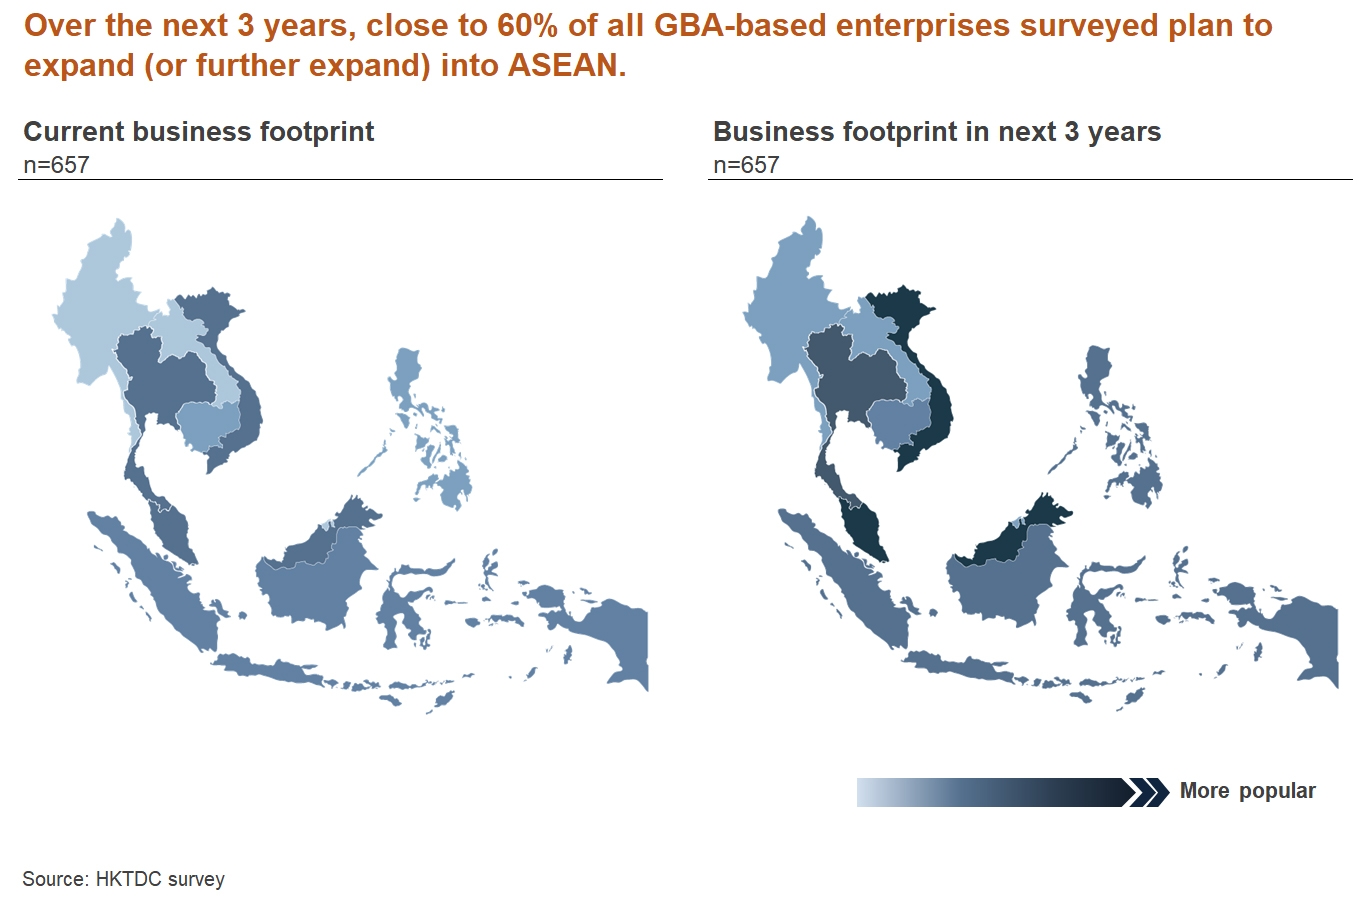 Chart: Over the next 3 years, close to 60% of all GBA-based enterprises surveyed plan to expand (or further expand into ASEAN.